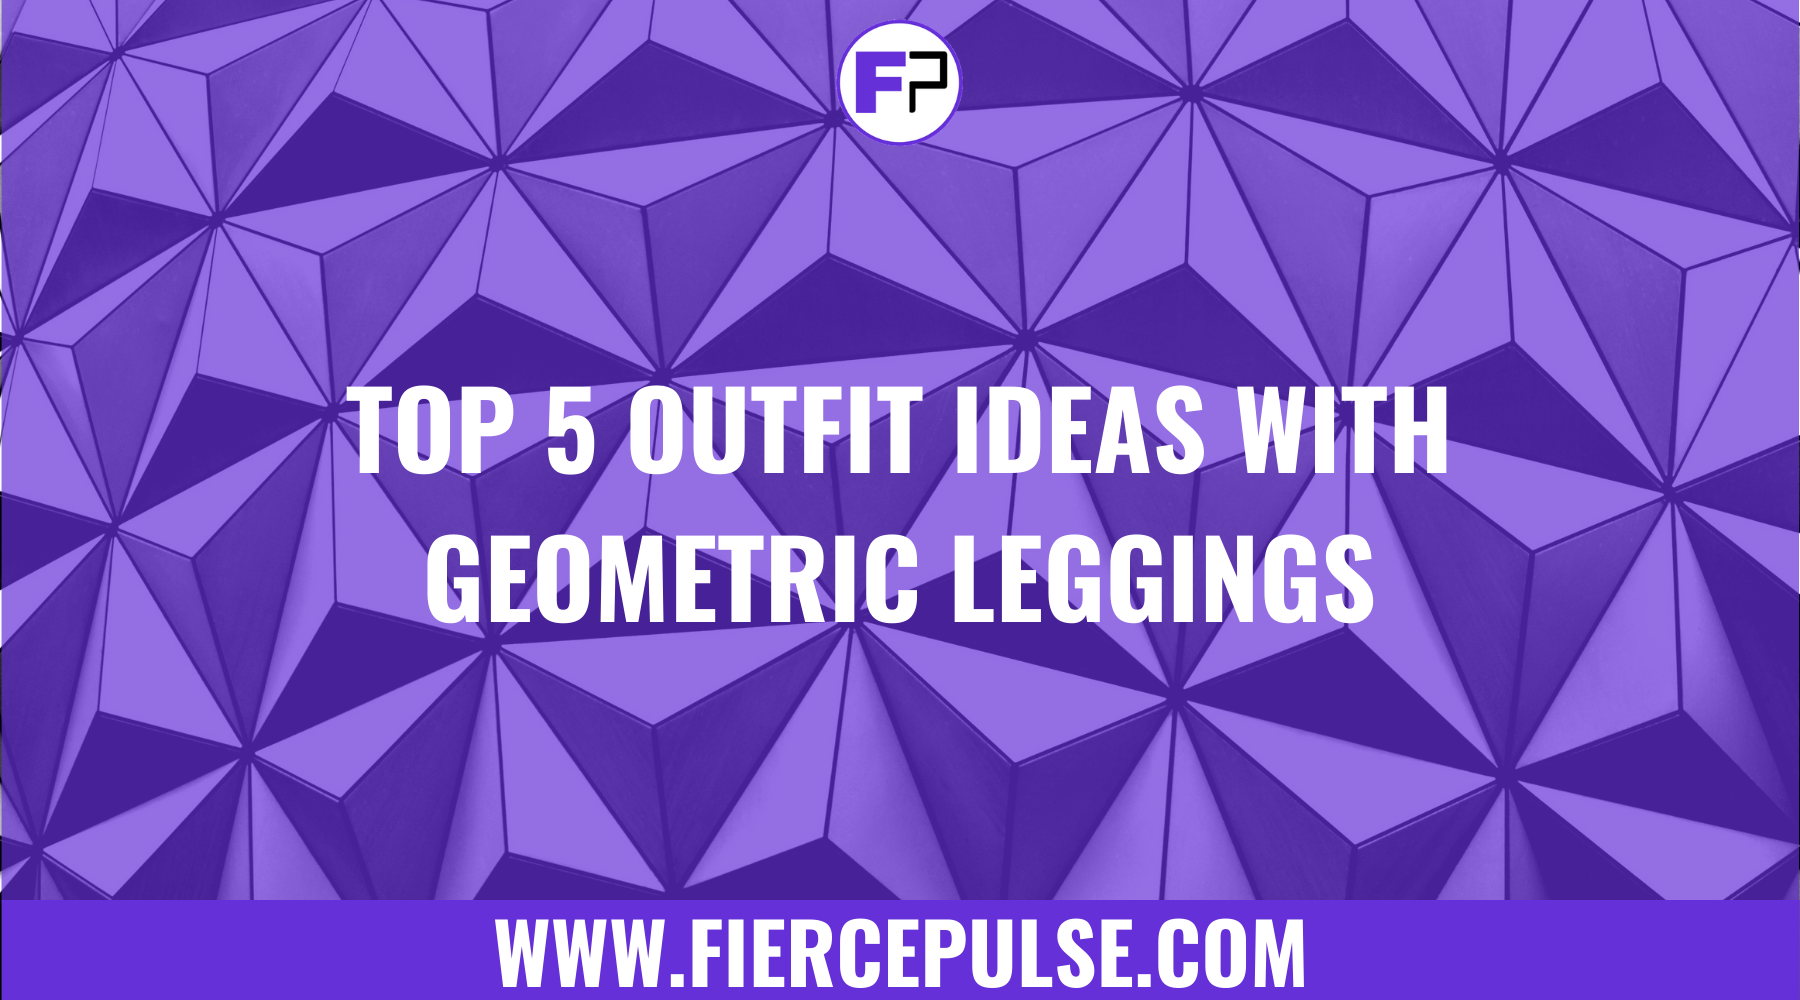 Top 5 Outfit Ideas with Geometric Leggings